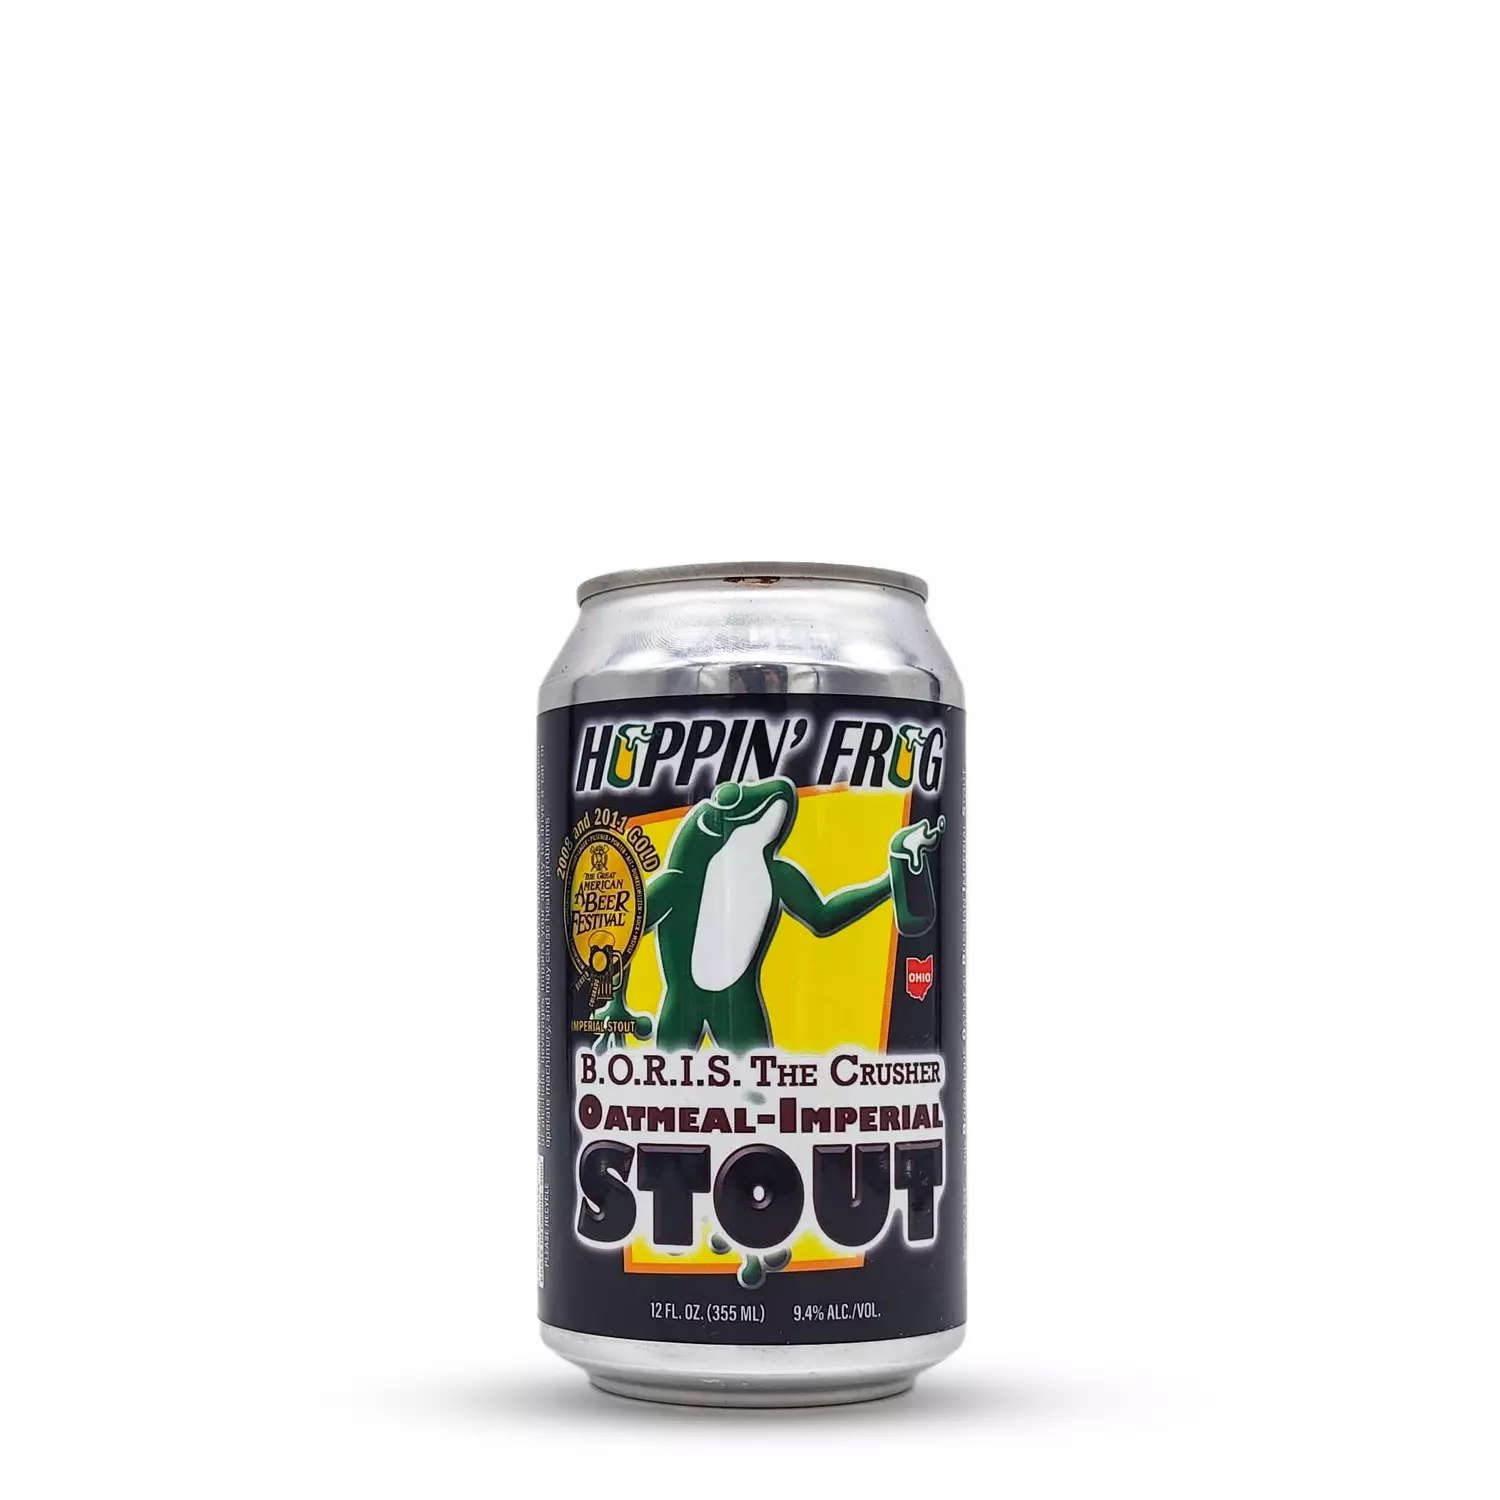 B.O.R.I.S. The Crusher Oatmeal-Imperial Stout | Hoppin' Frog (USA) | 0,355L - 9,4%